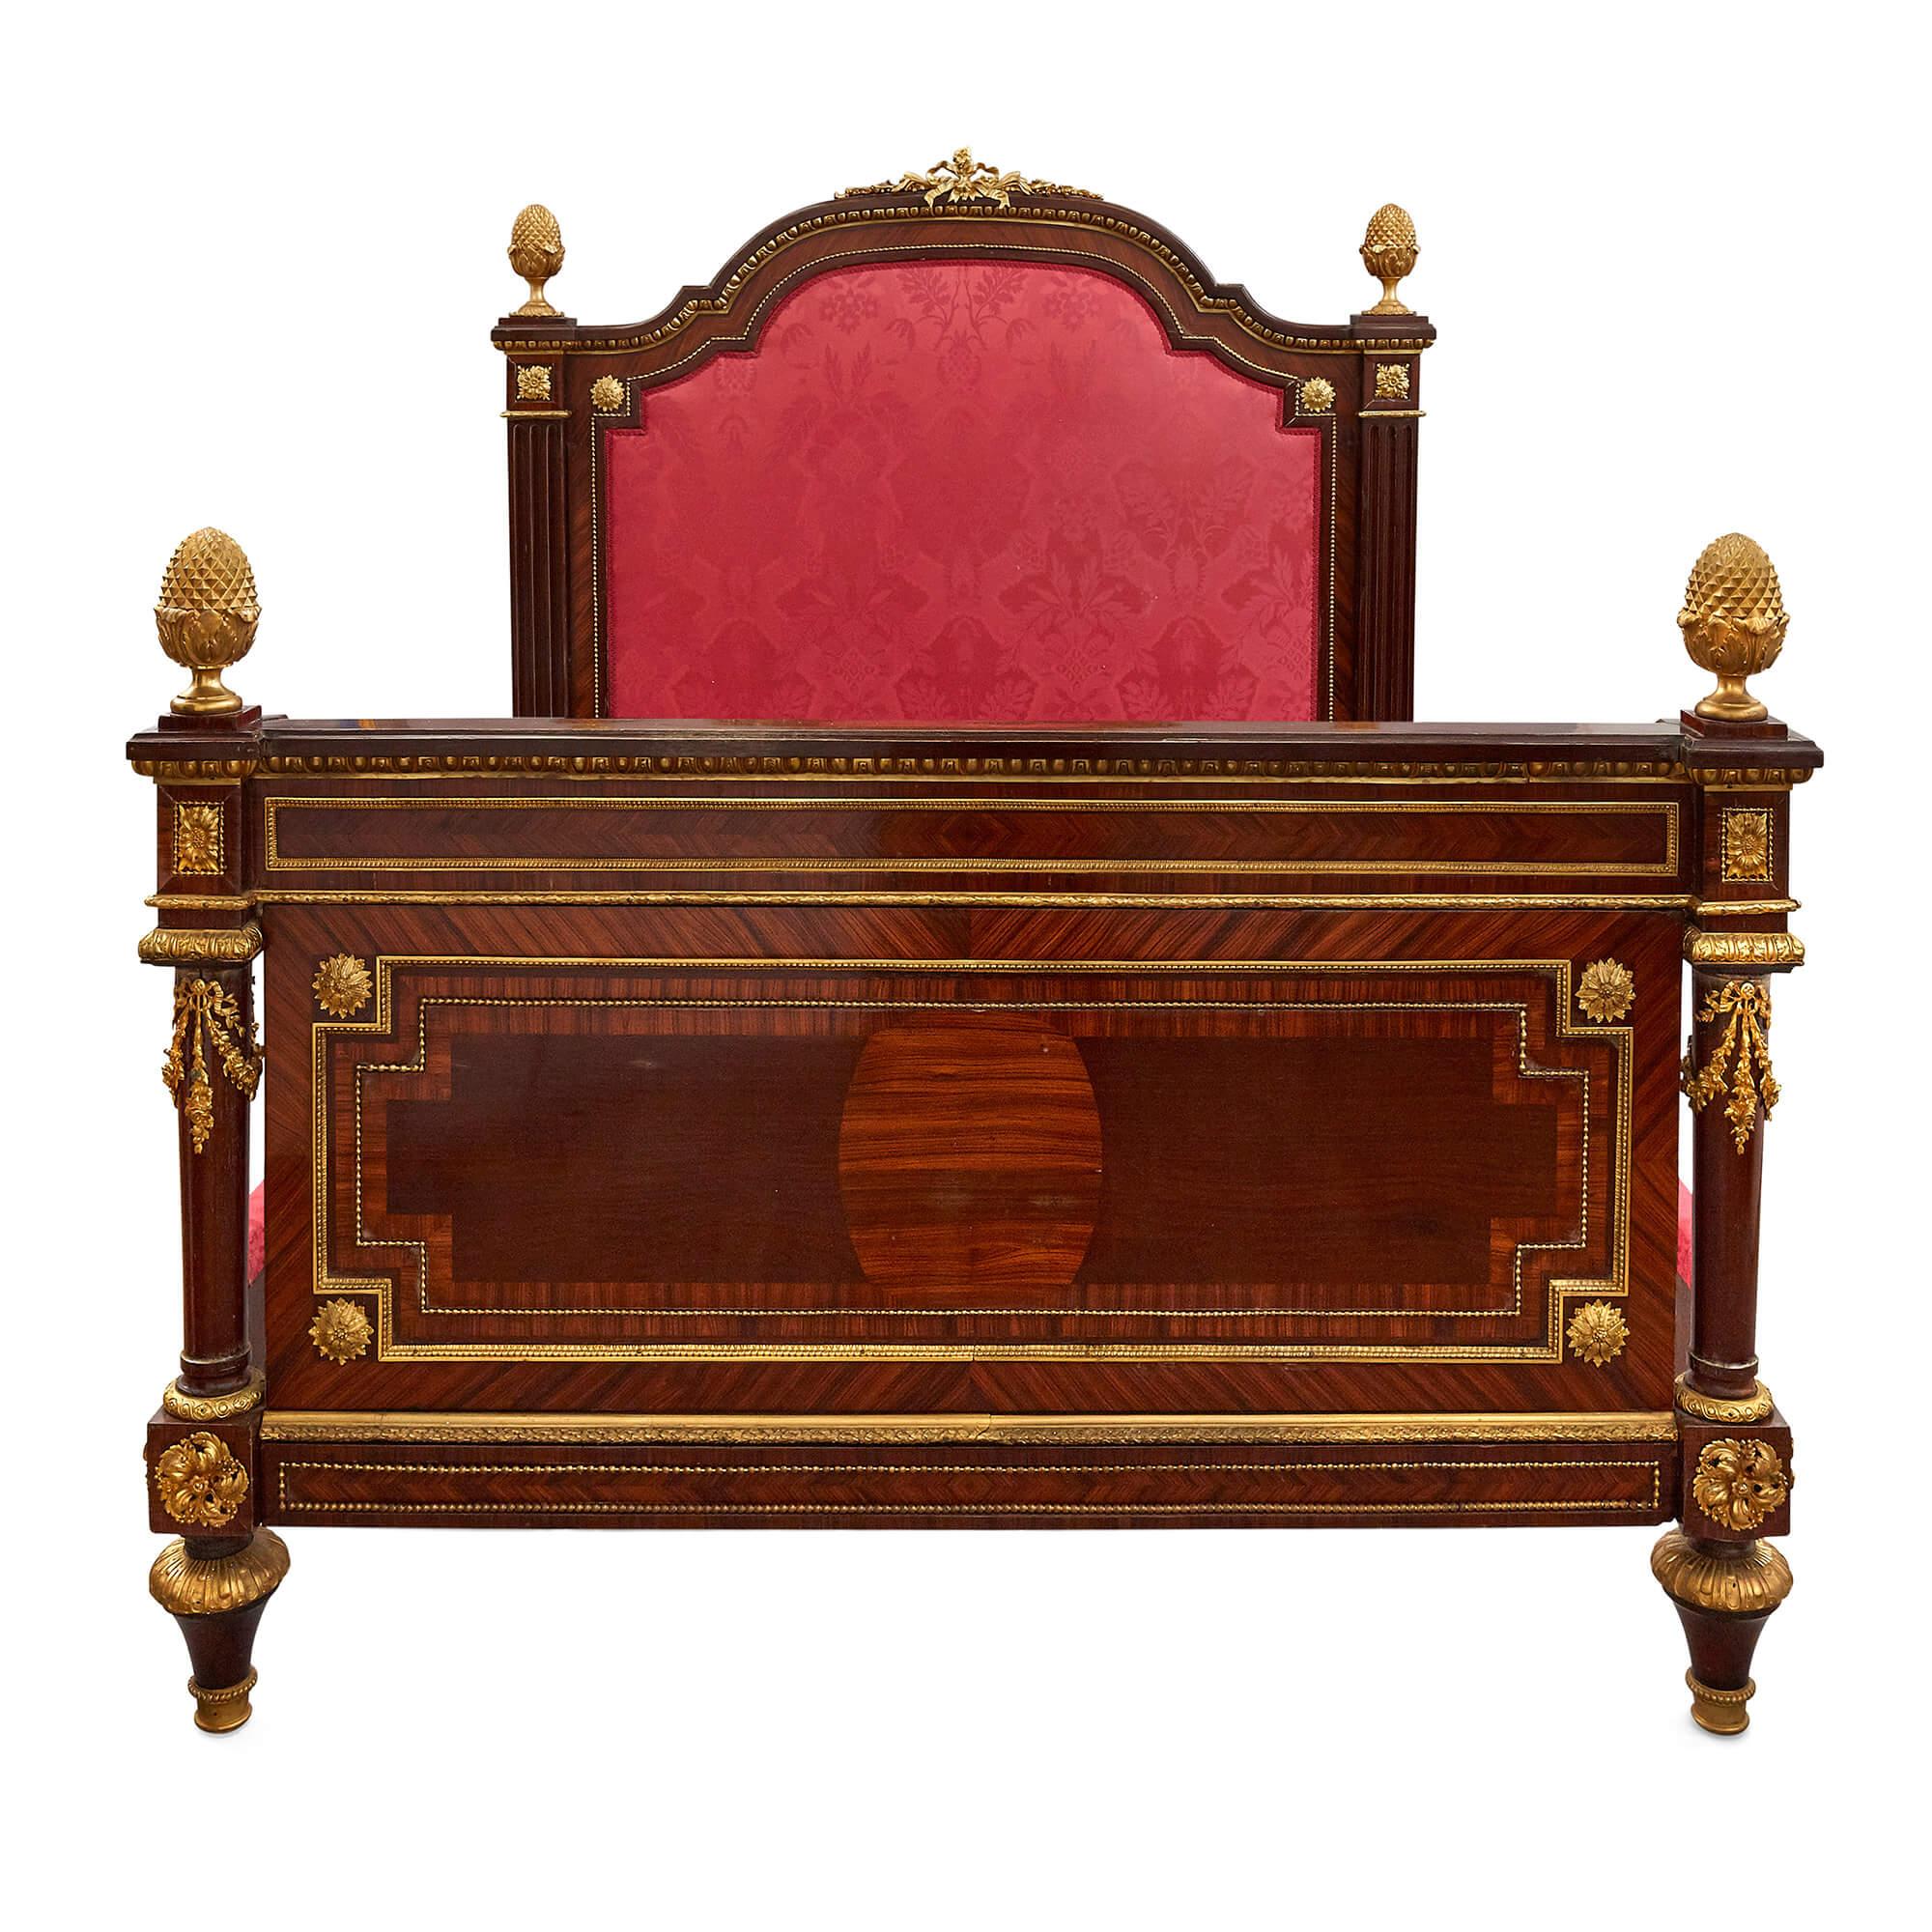 Large French neoclassical style gilt bronze mounted bed
French, late 19th century
Measures: Height 143cm, width 147cm, depth 225cm

This impressive bed is crafted in the neoclassical style from wood, gilt bronze, and red velvet. The bed features